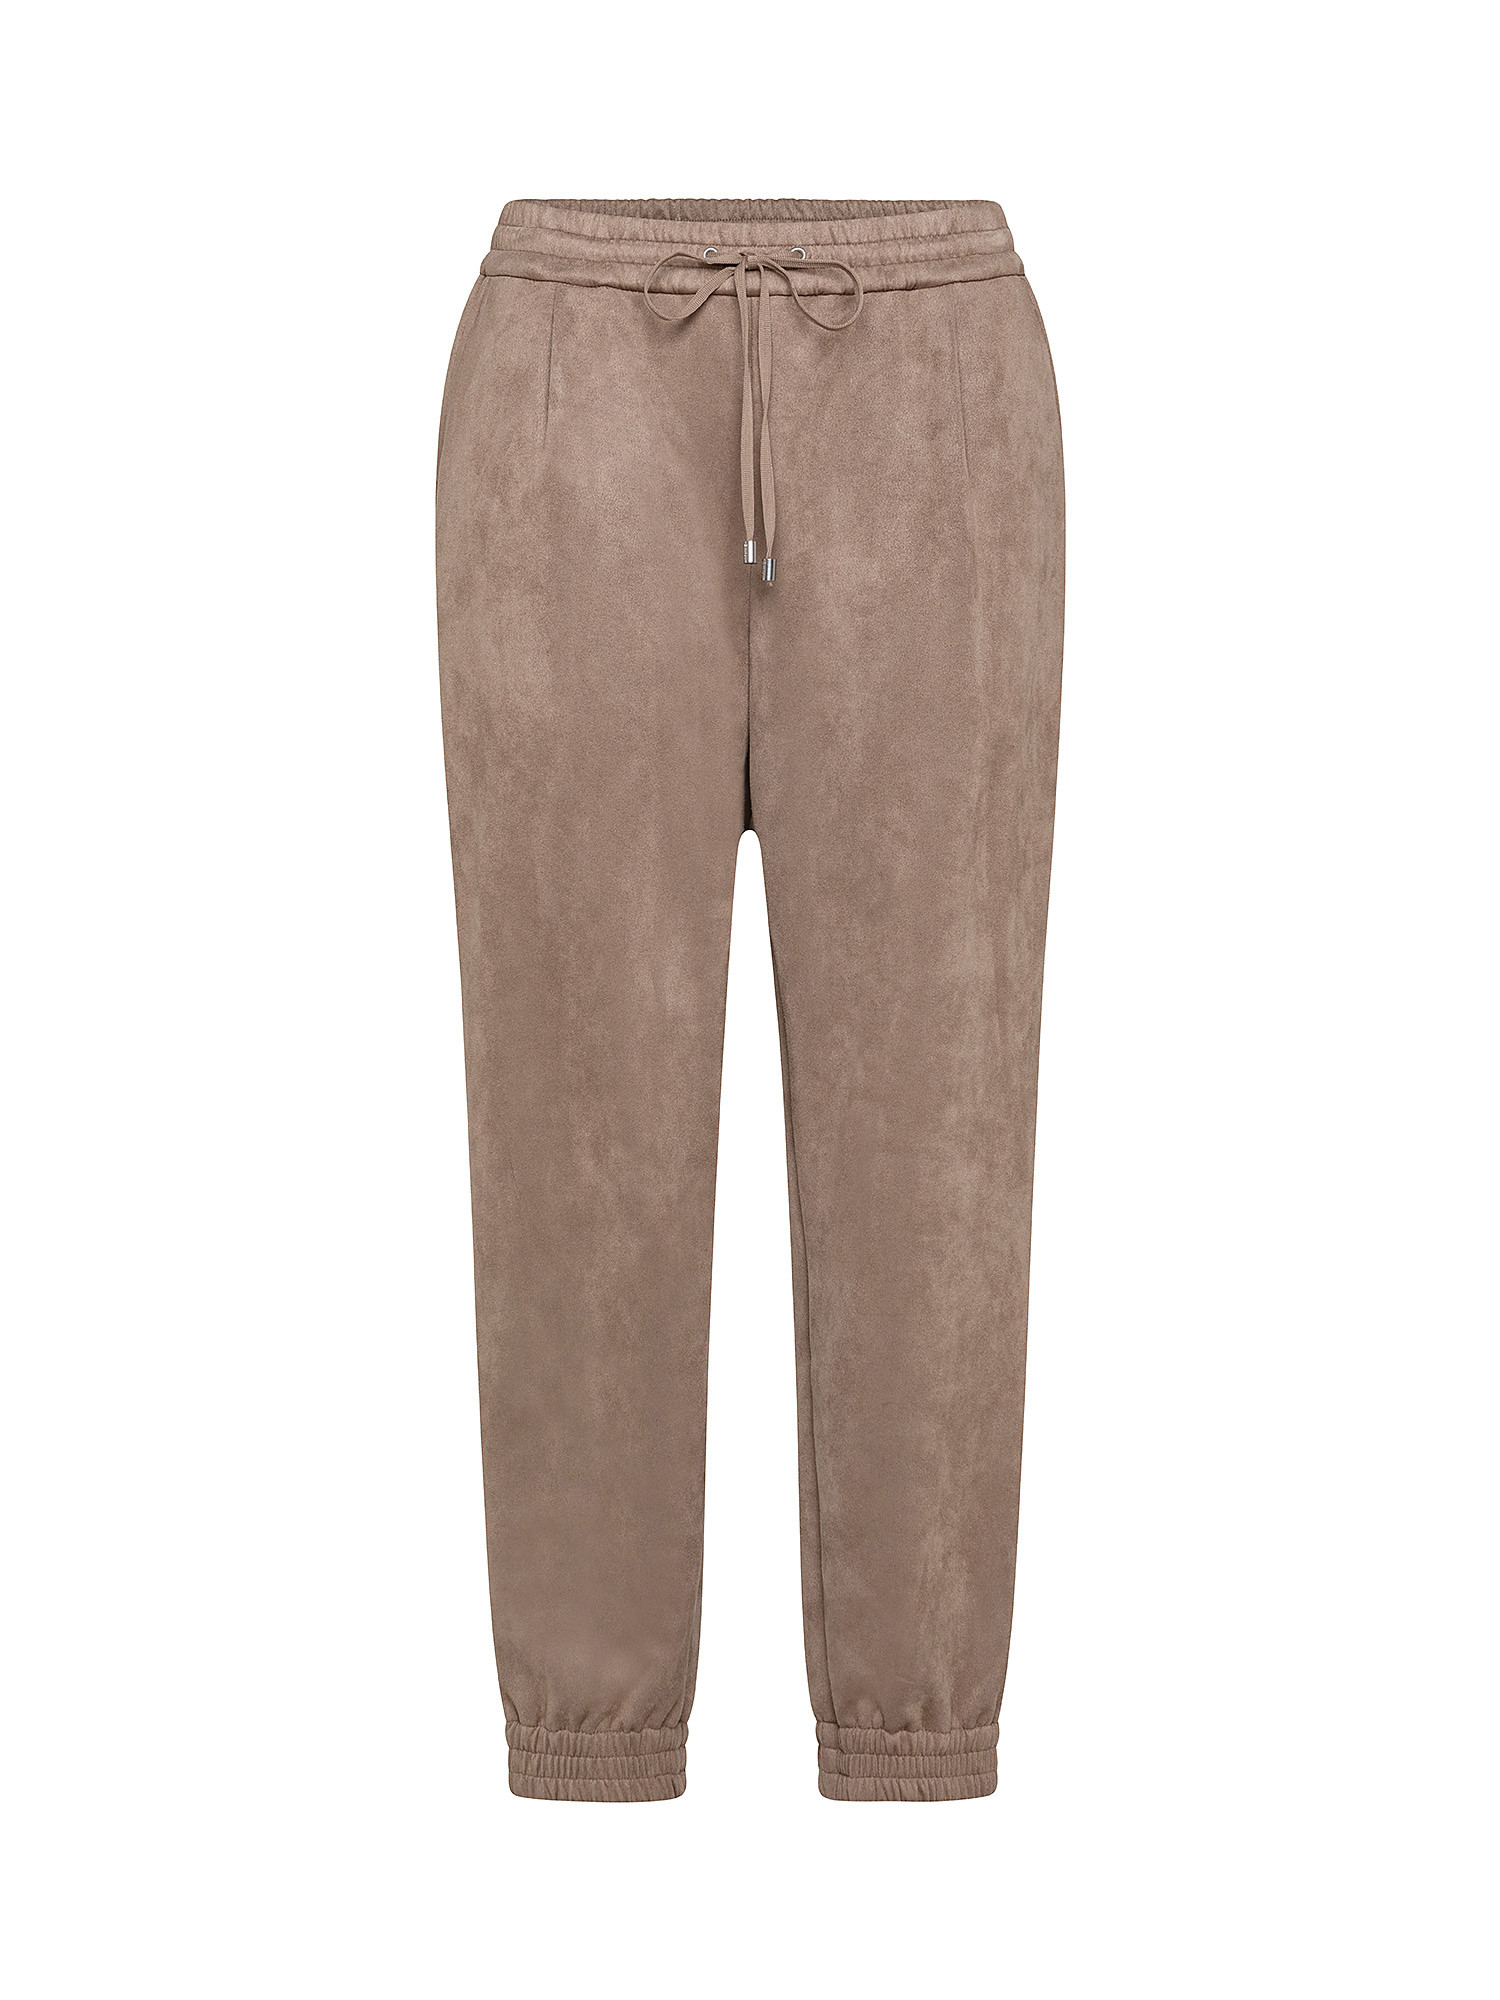 Pantalone jogger in camoscio, Marrone, large image number 0